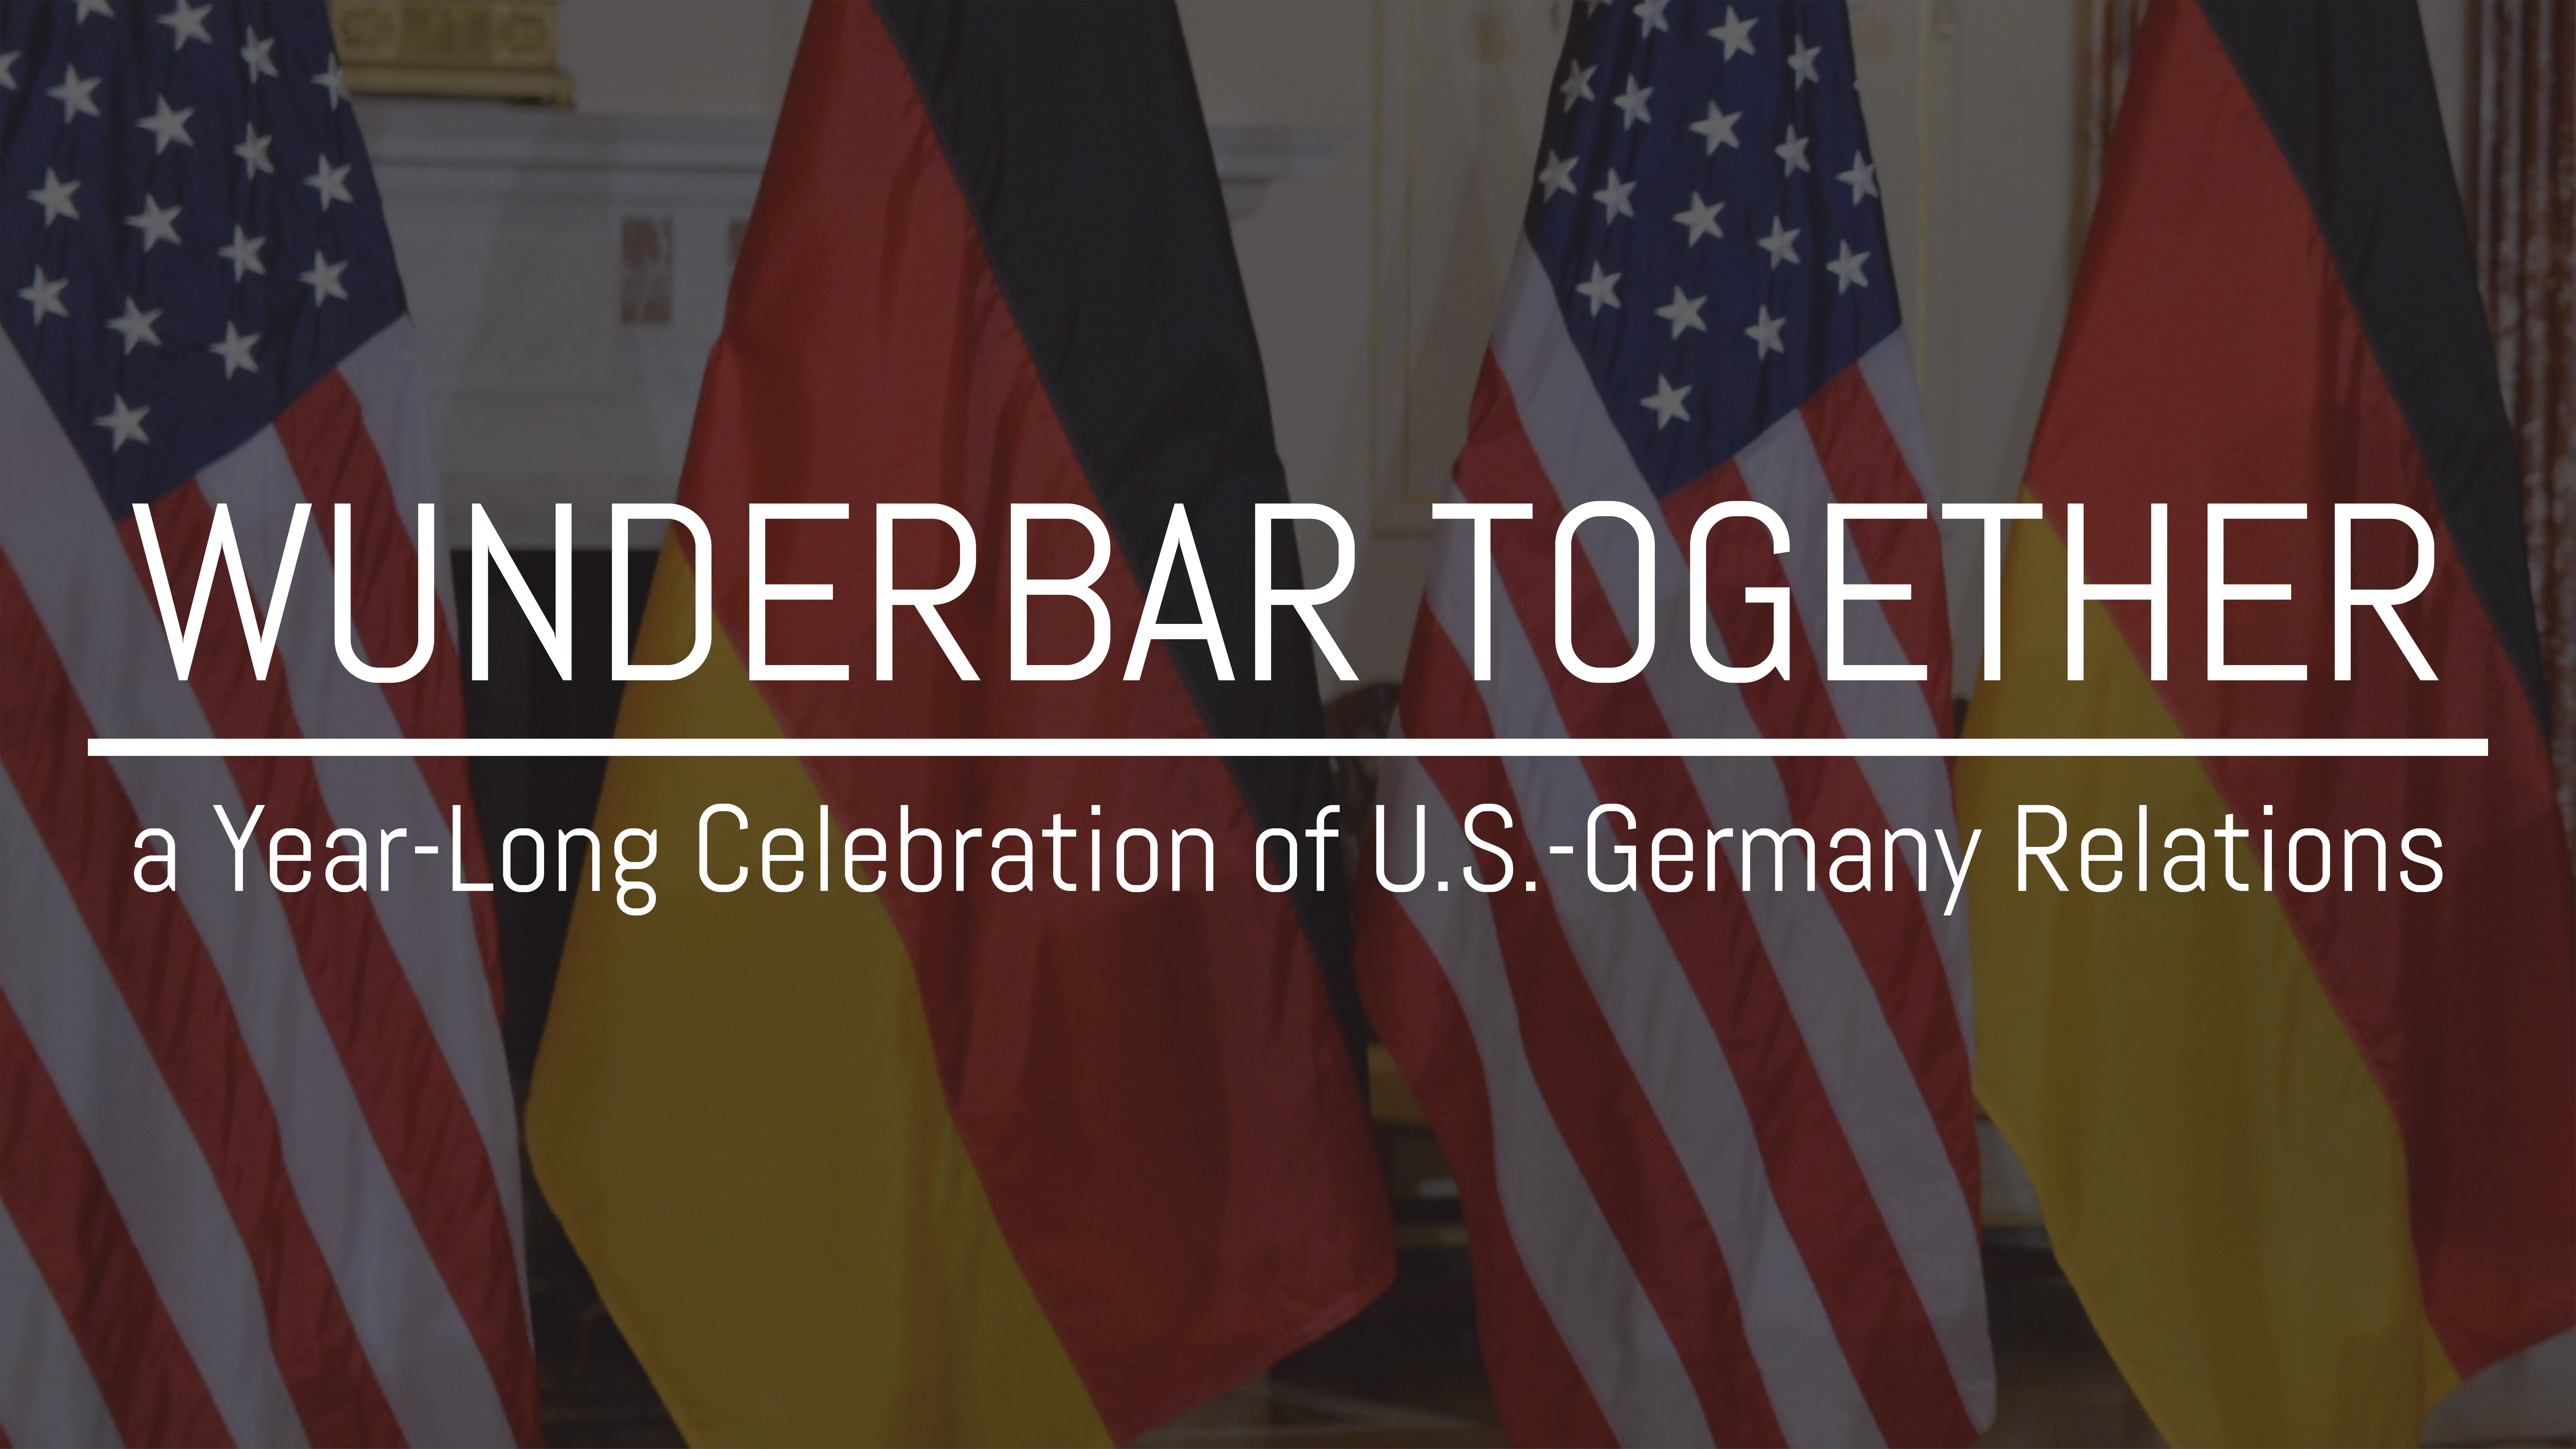 American and German flags with text WunderBar together over it